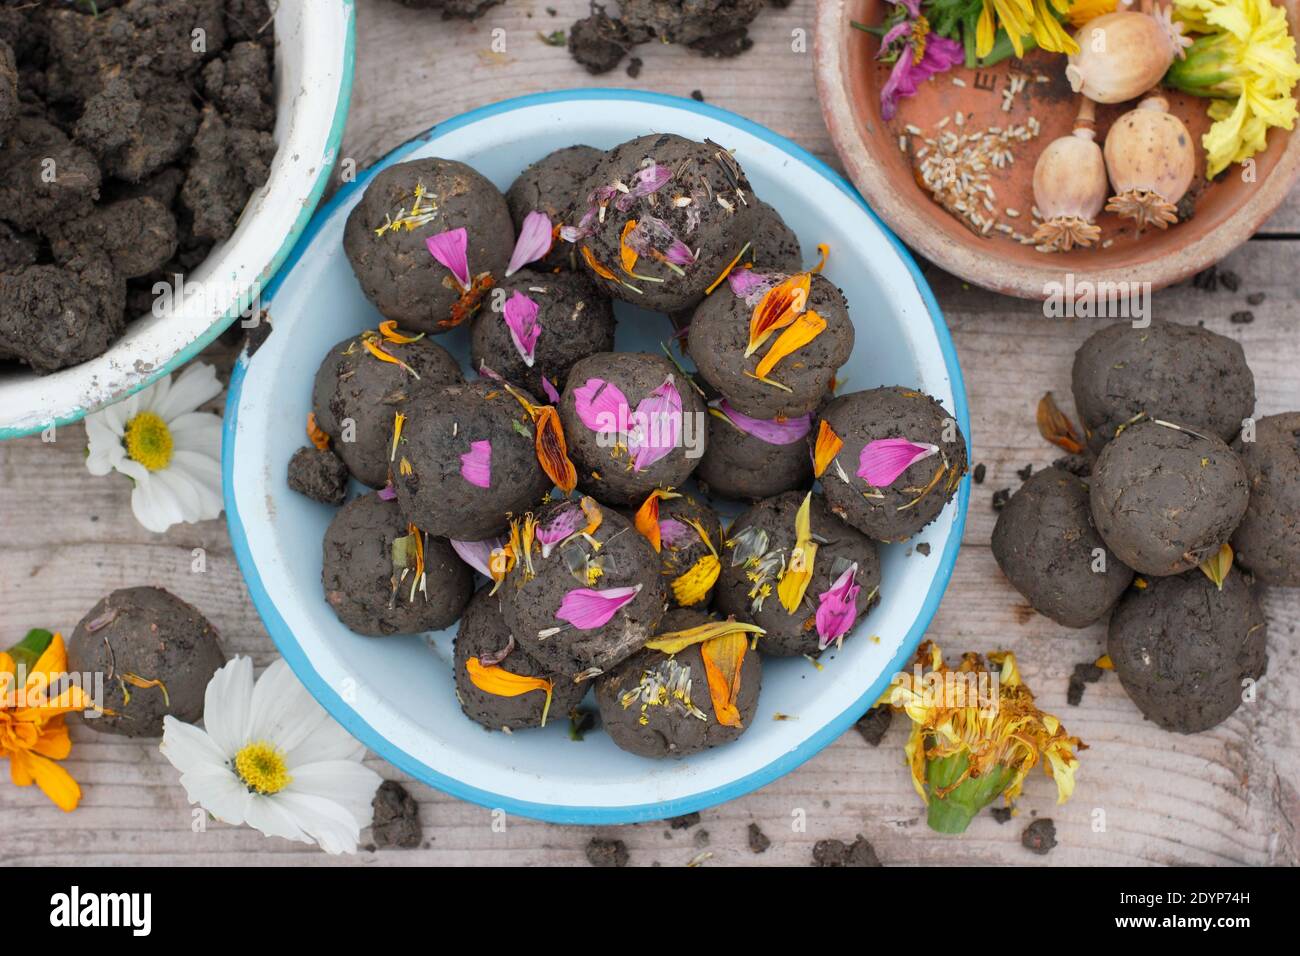 Homemade flower seed bombs made with clay soil embedded with poppy, rudbeckia, marigold, cornflower, cosmos seeds and embellished with flower petals. Stock Photo